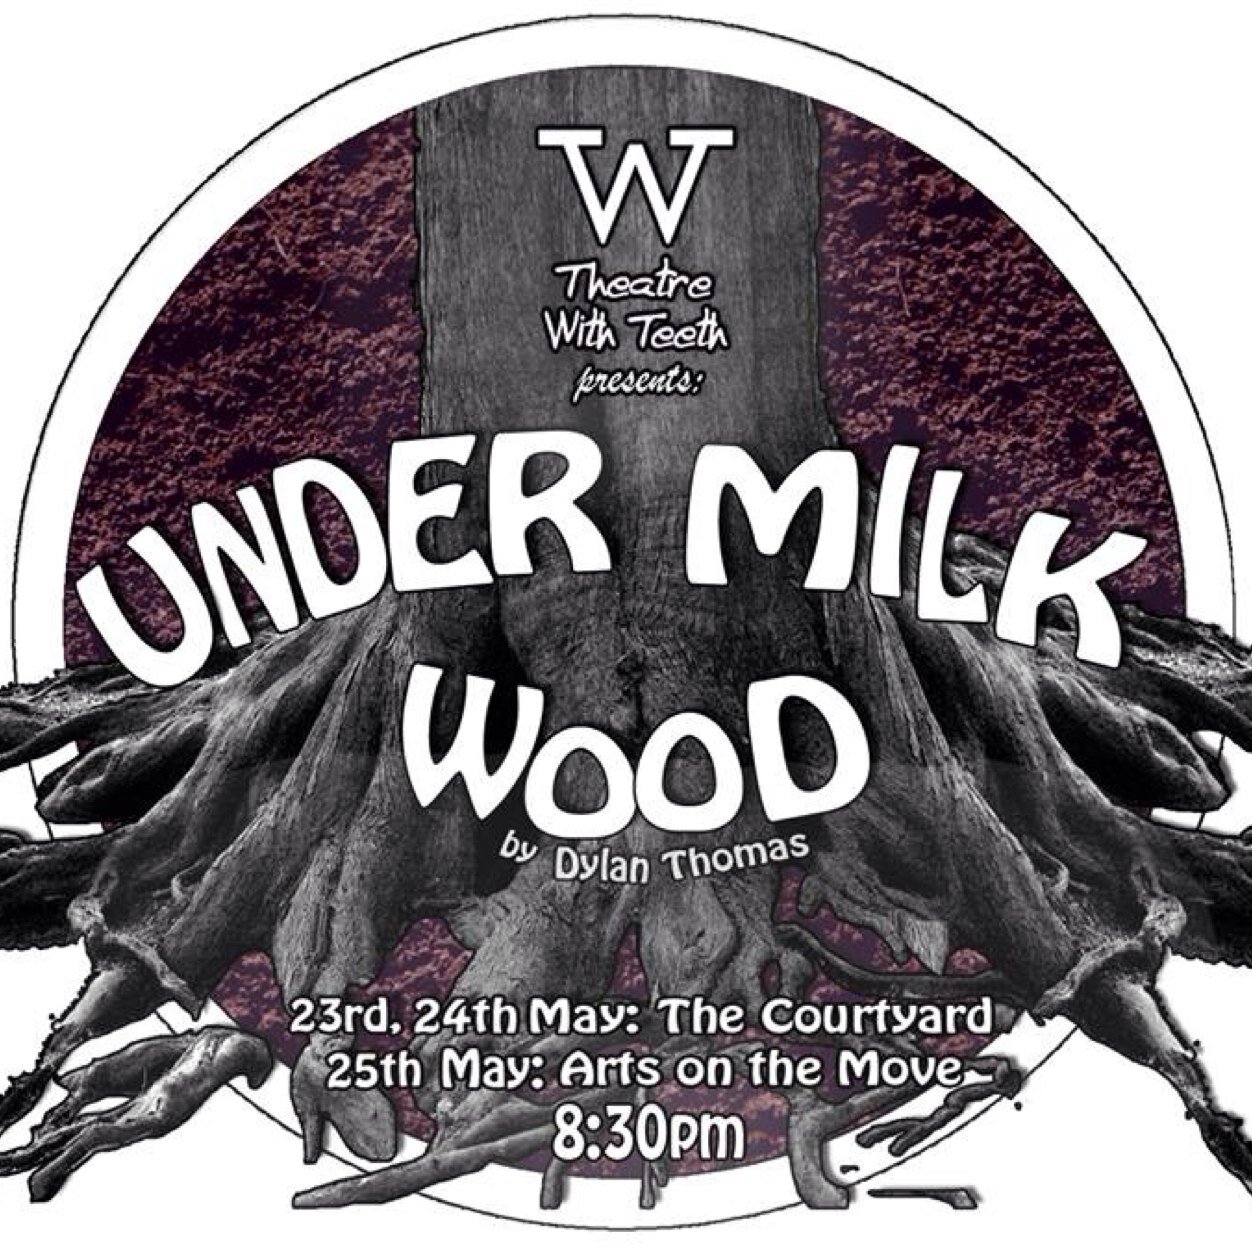 Uni of Exeter's Theatre With Teeth present Dylan Thomas' 'Under Milk Wood'. 23rd-25th May 8:30pm! Tickets: nb359@exeter.ac.uk £3.50-£4.50